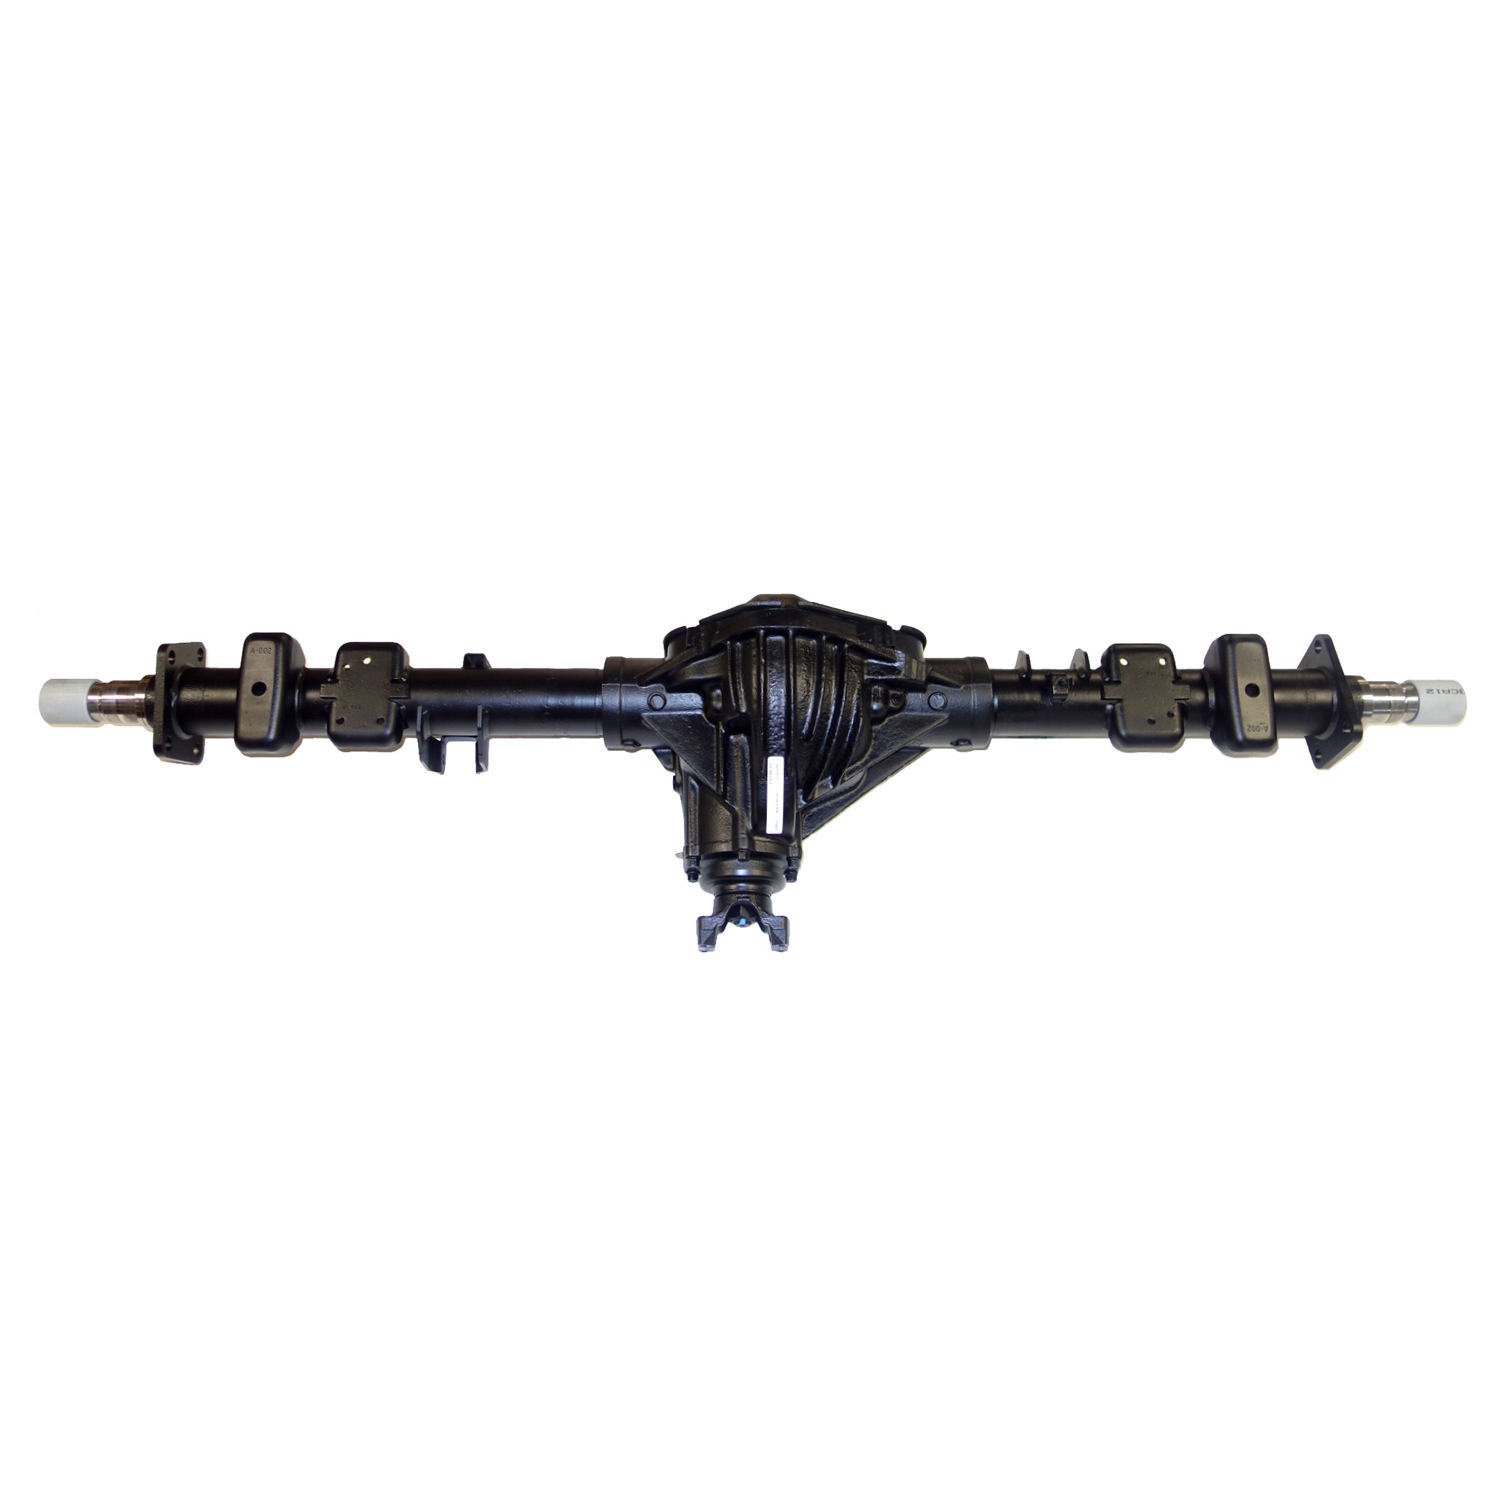 Remanufactured Axle Assy GM 14 Bolt Truck 90-00 GM 3500, 3.73 , DRW, Posi LSD, Wide Track